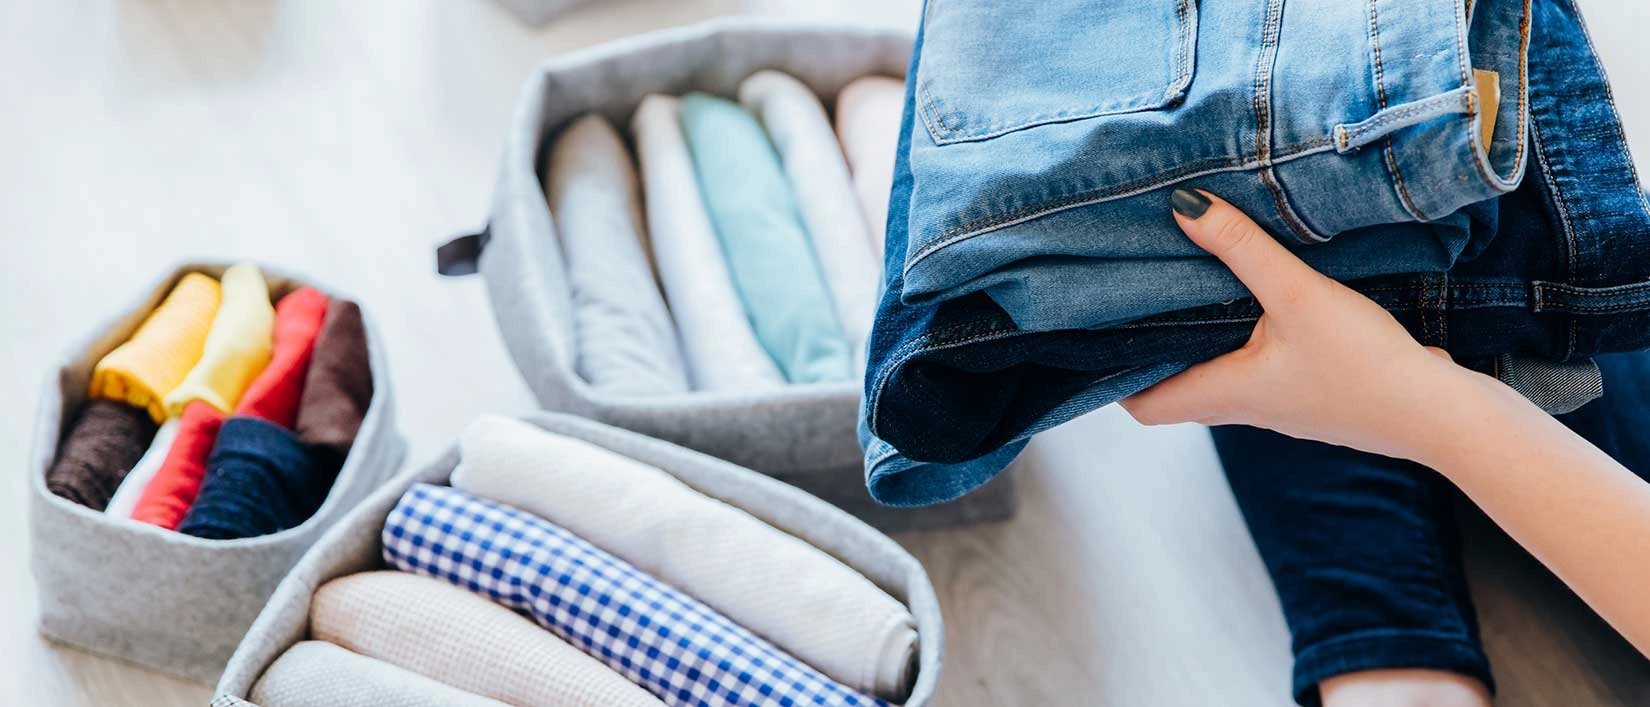 Wash and fold laundry service in Lexington and Weston, MA